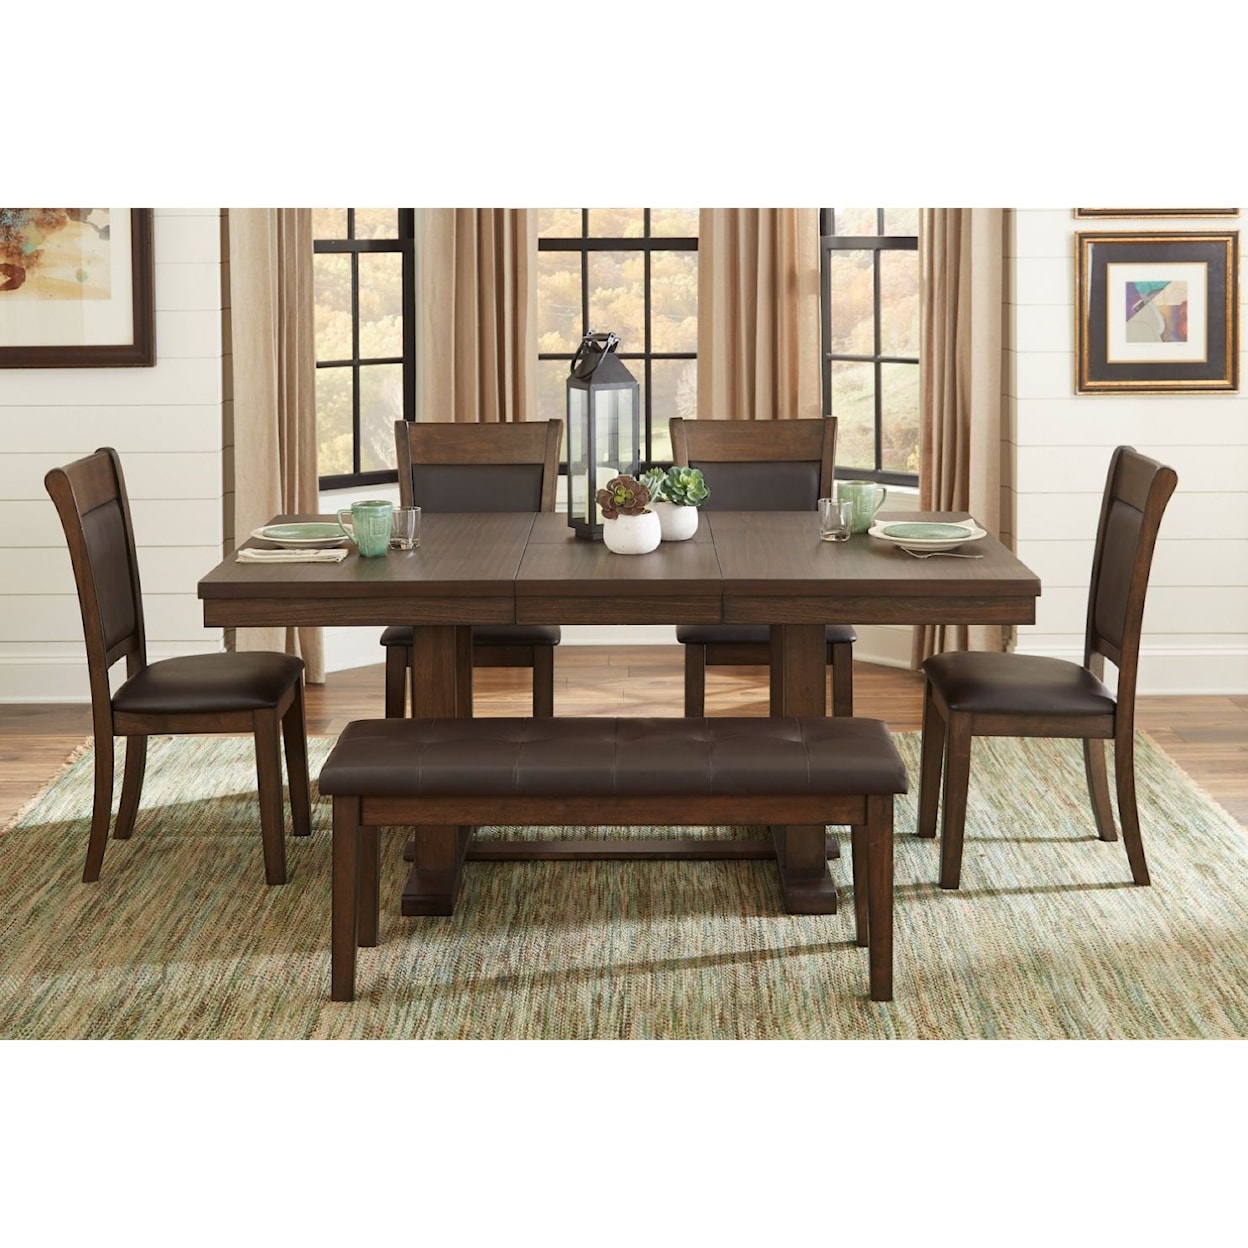 Homelegance Wieland 6-Piece Table and Chair Set with Bench